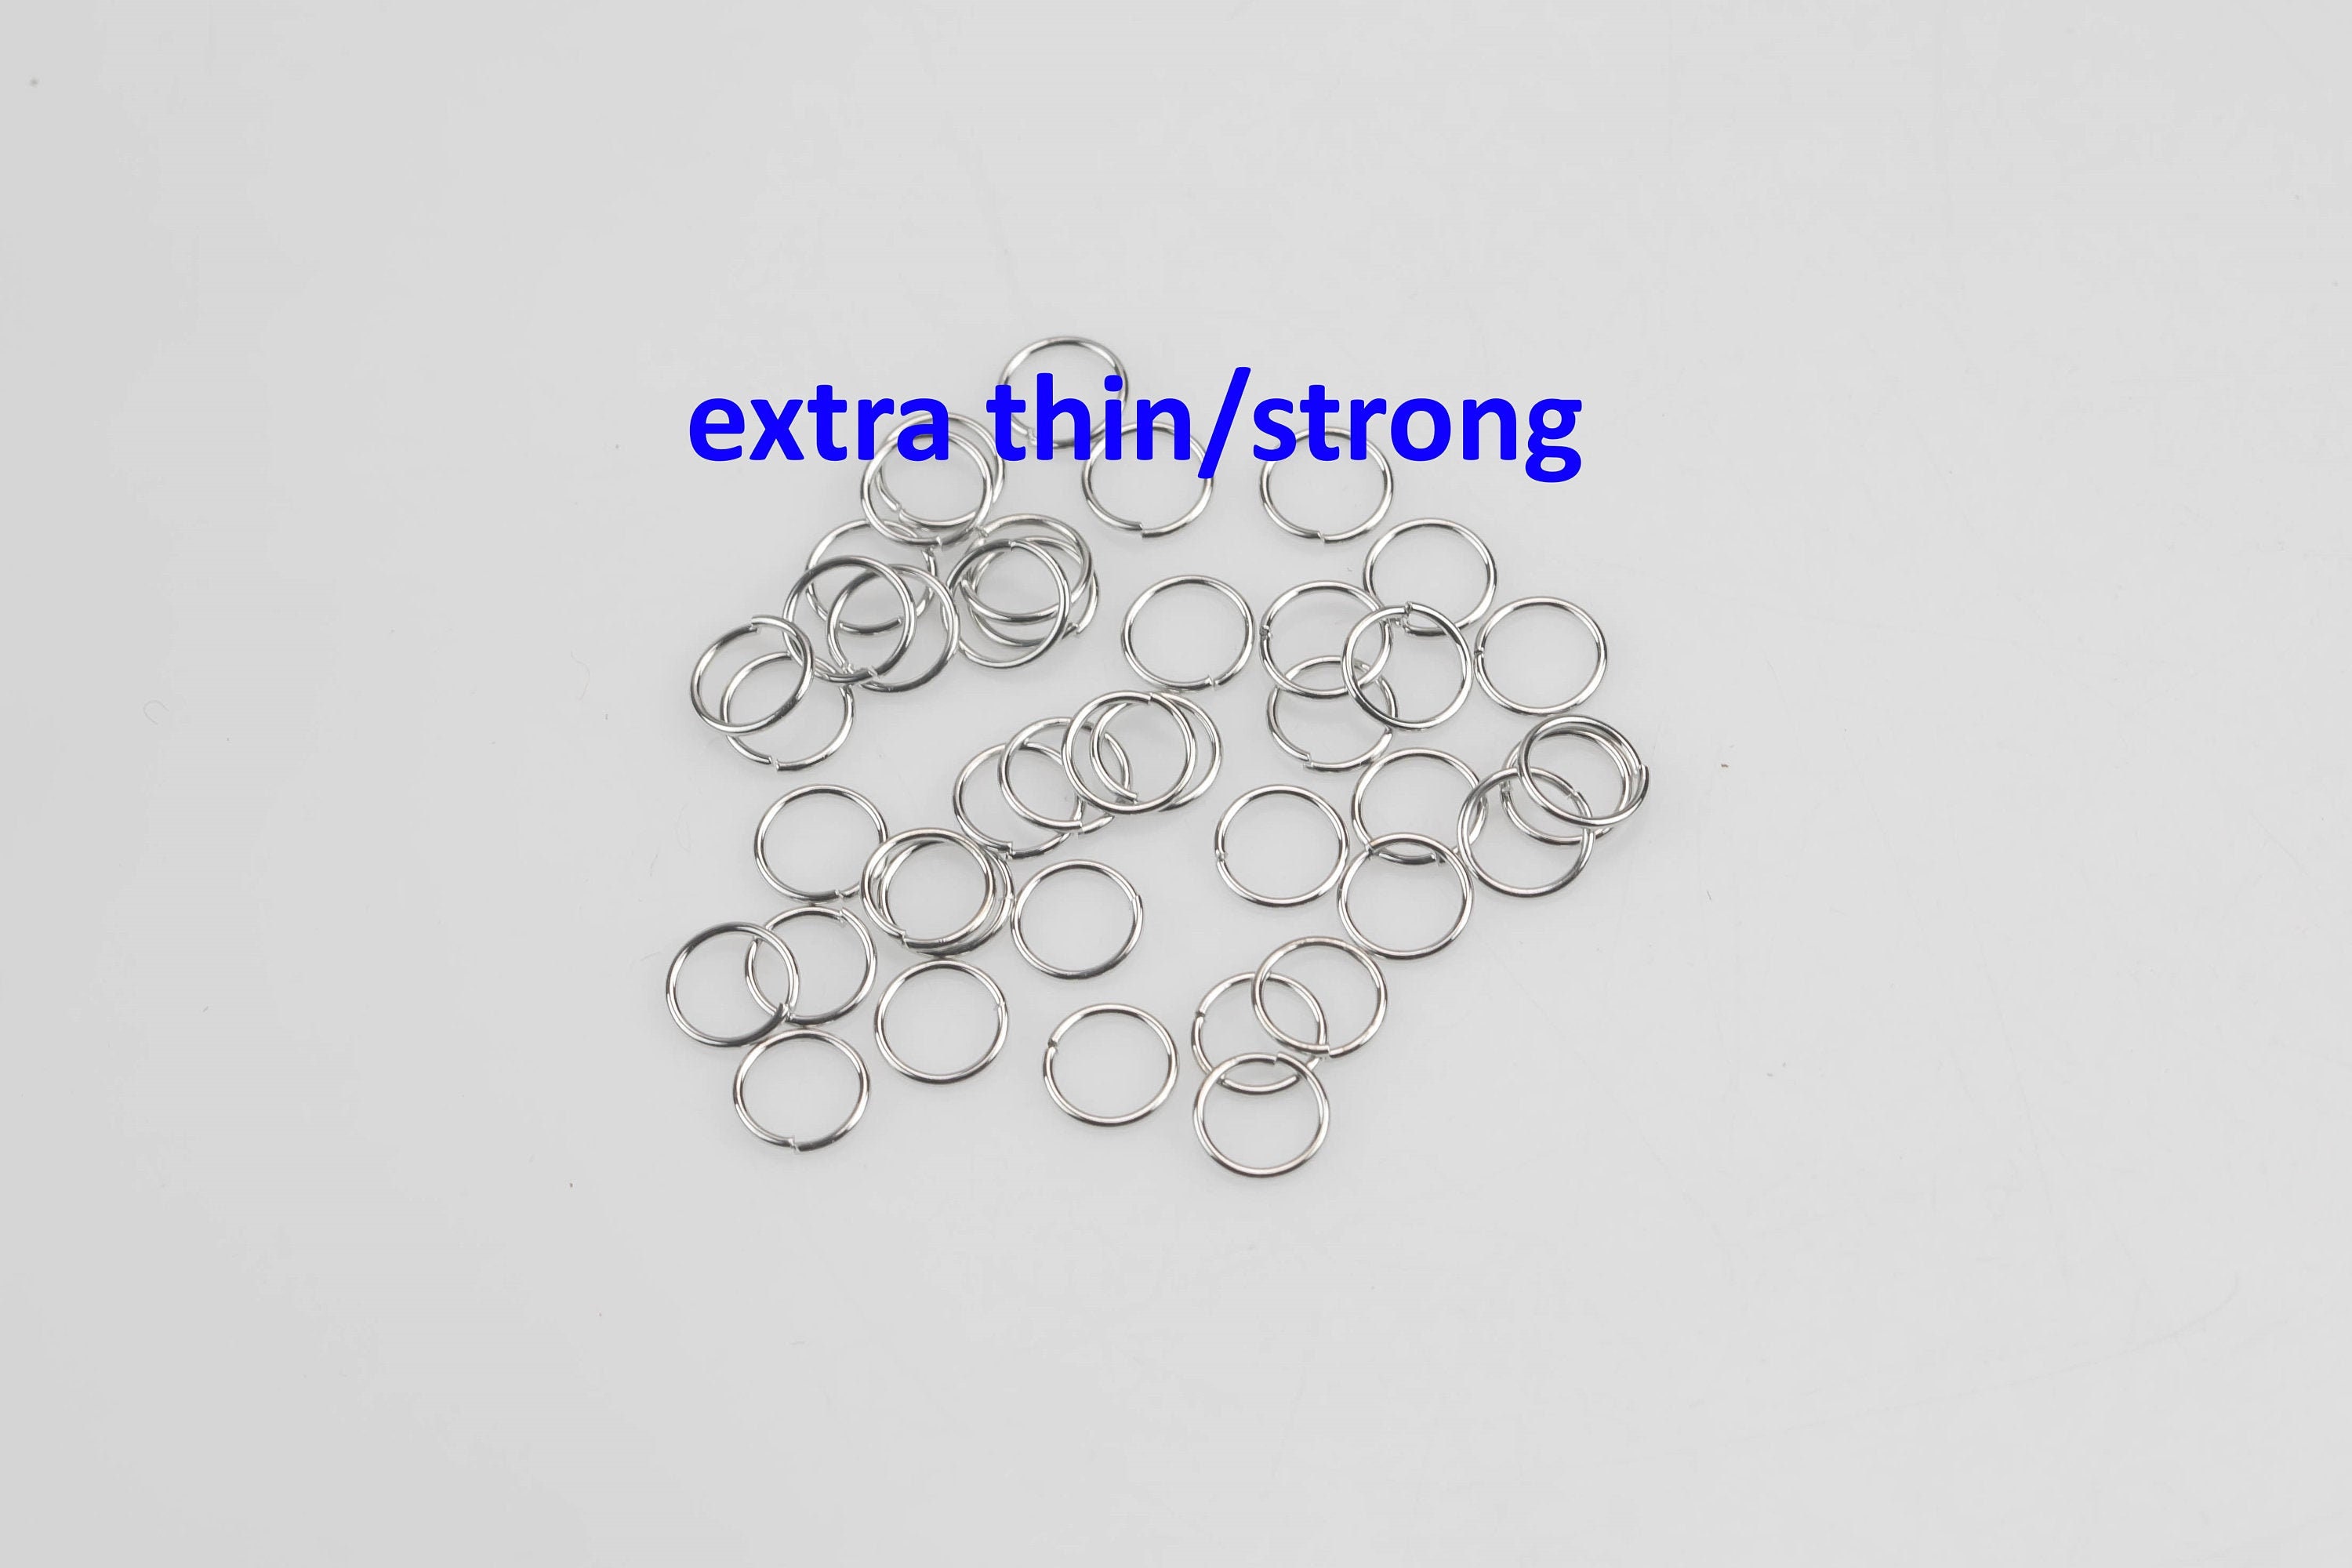 Stainless Steel Gold Jump Rings, 13 mm Open Twisted Silver Rings #384,  Large Textured 12 Gauge